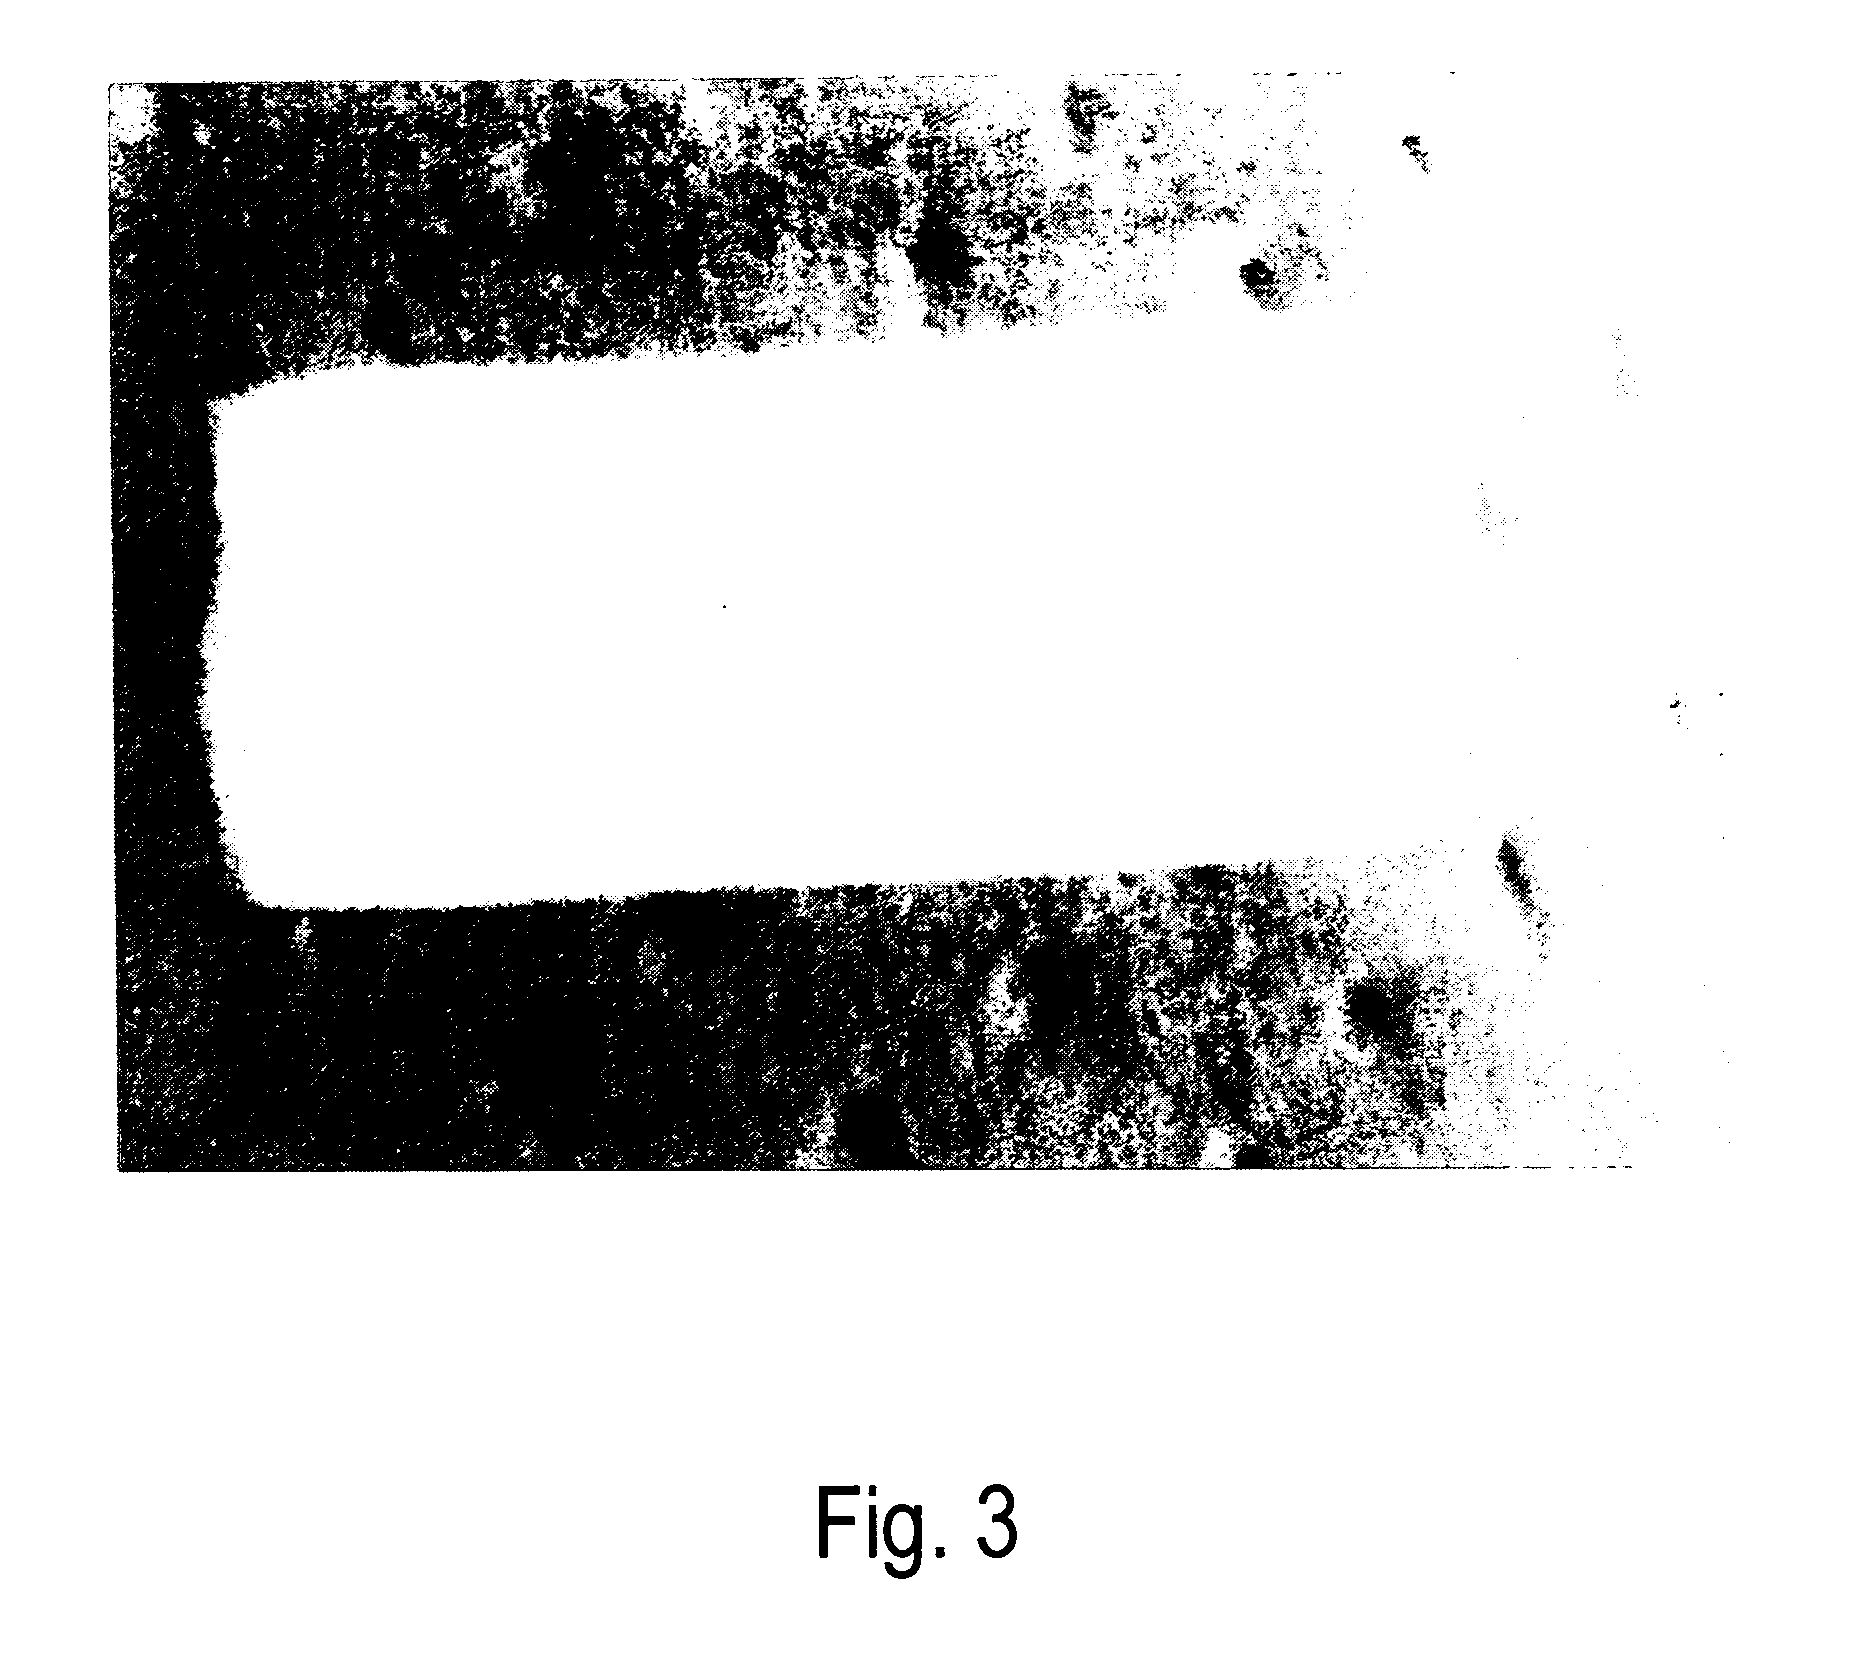 Crosslinked elastin and process for producing the same